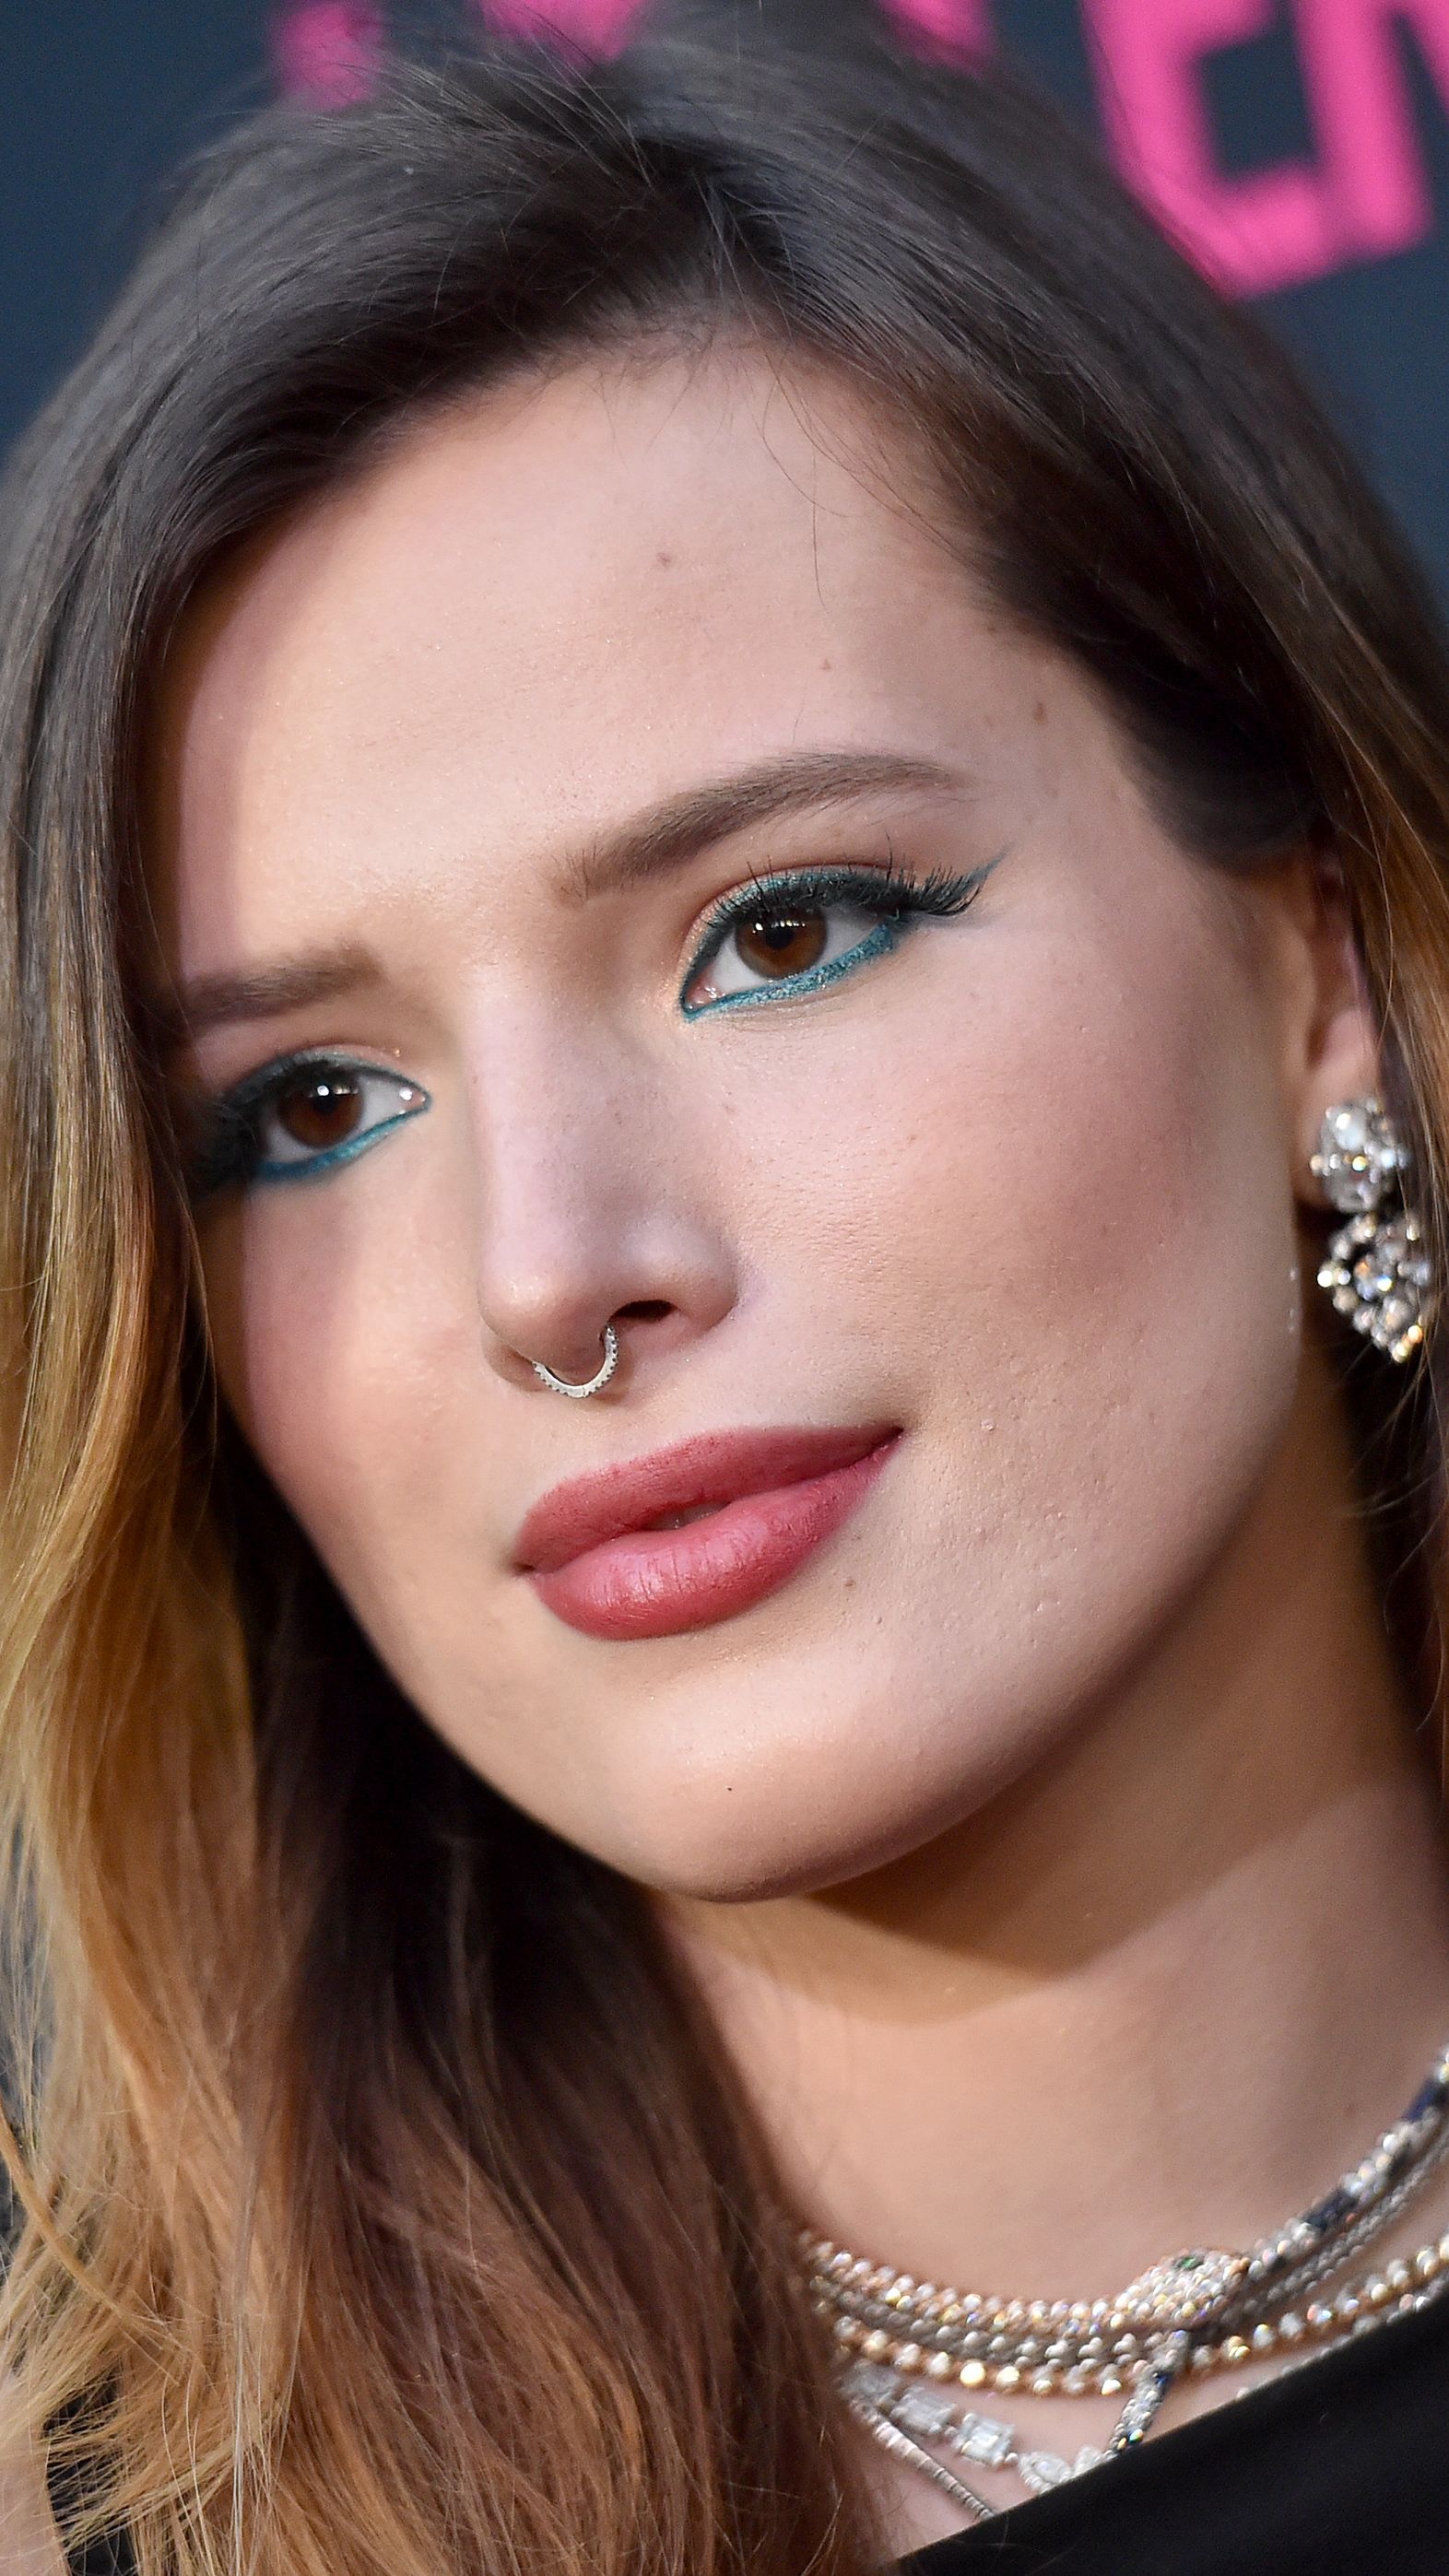 Bella Thorne Porn Story - Bella Thorne Directed an Adult Film for Pornhub â€” These Are the Details |  Allure